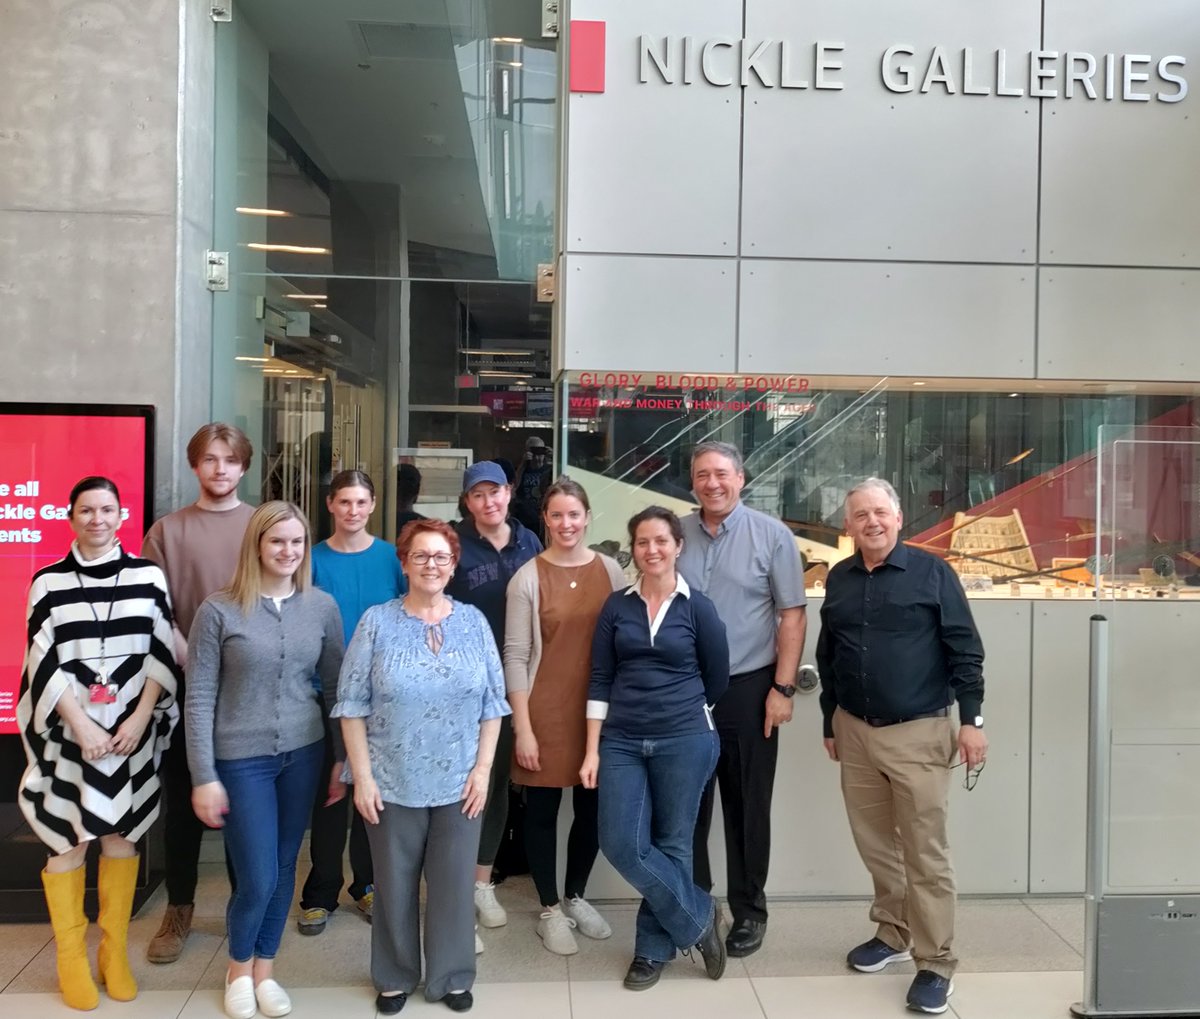 Thanks to @marina_coins and @nicklegalleries and the Calgary Numismatic Society for a warm welcome and an excellent symposium about all things money! events.ucalgary.ca/nickle-galleri… #numismatics #Museums #Greek #coins #ClassicsTwitter